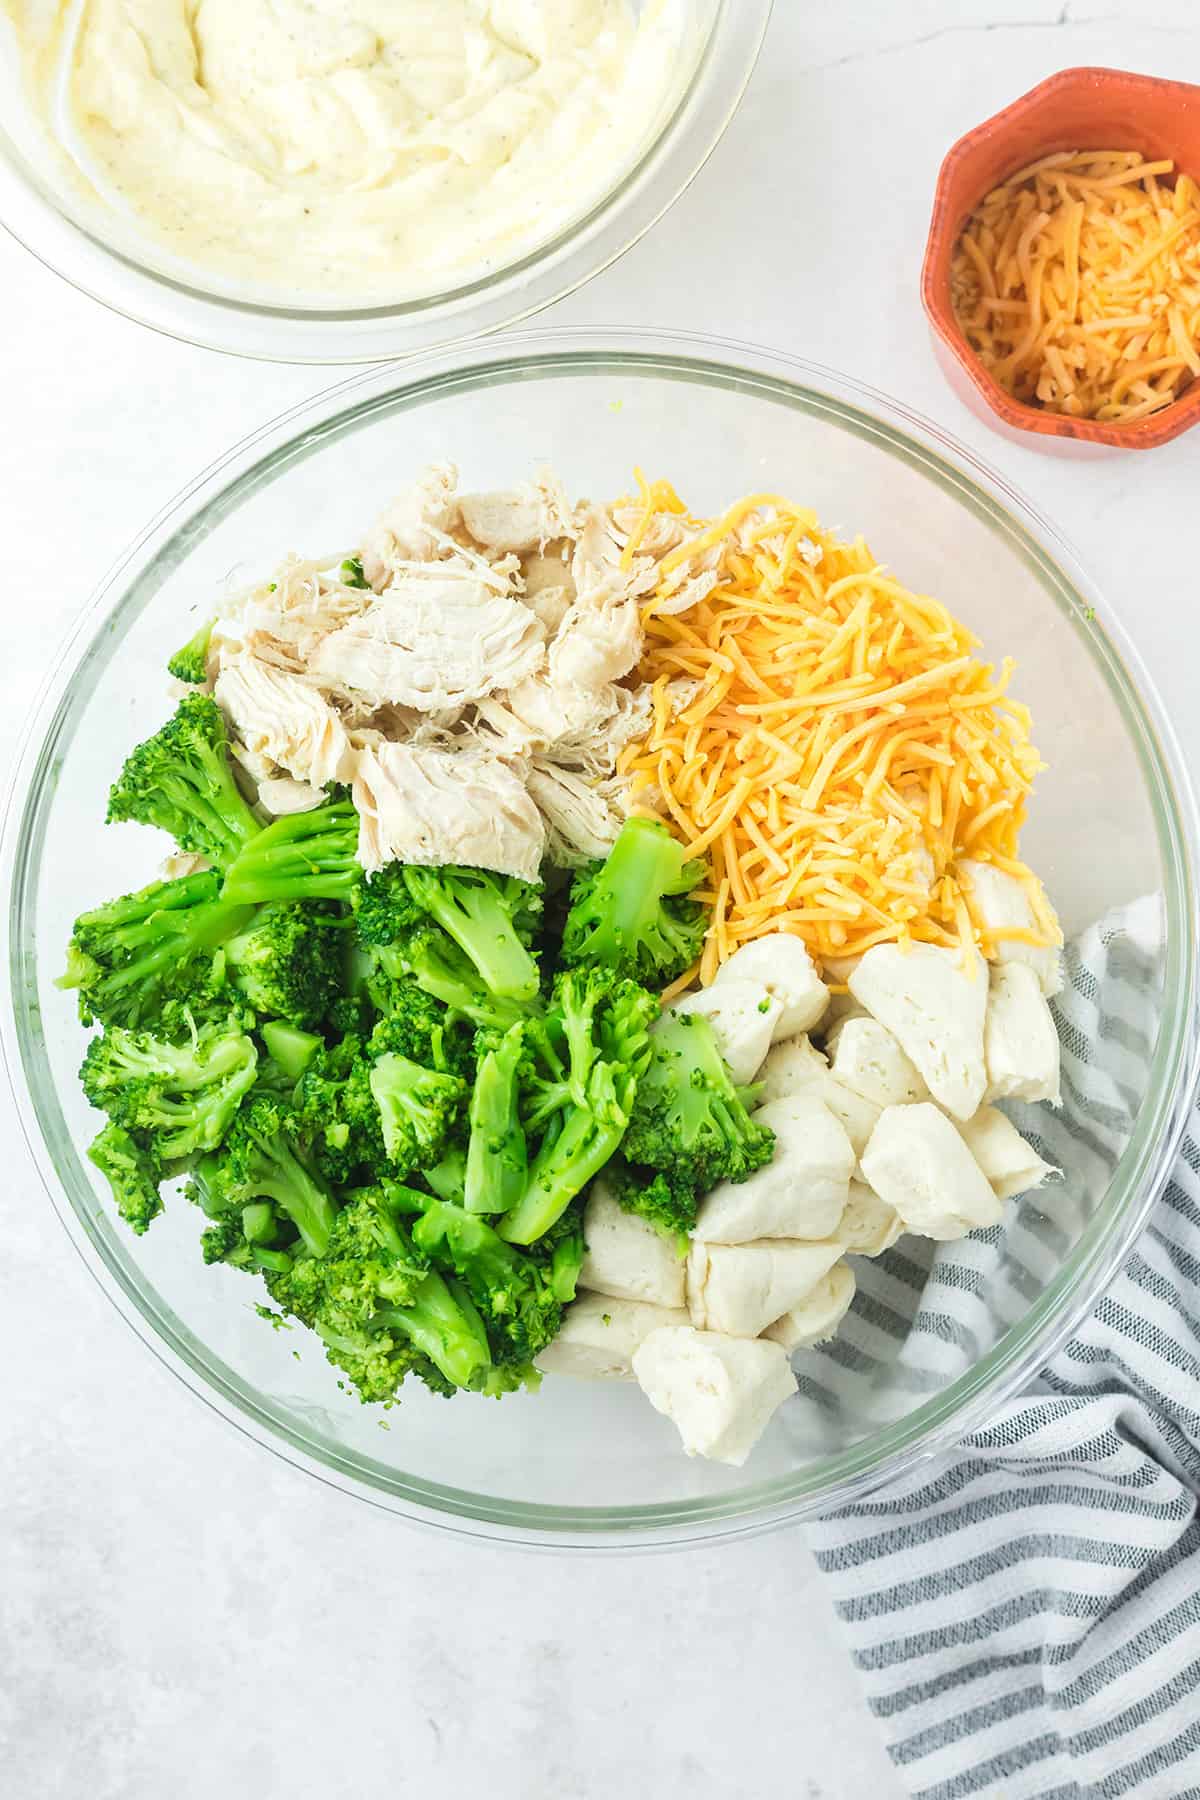 Chicken, broccoli, and cheese in a large bowl.